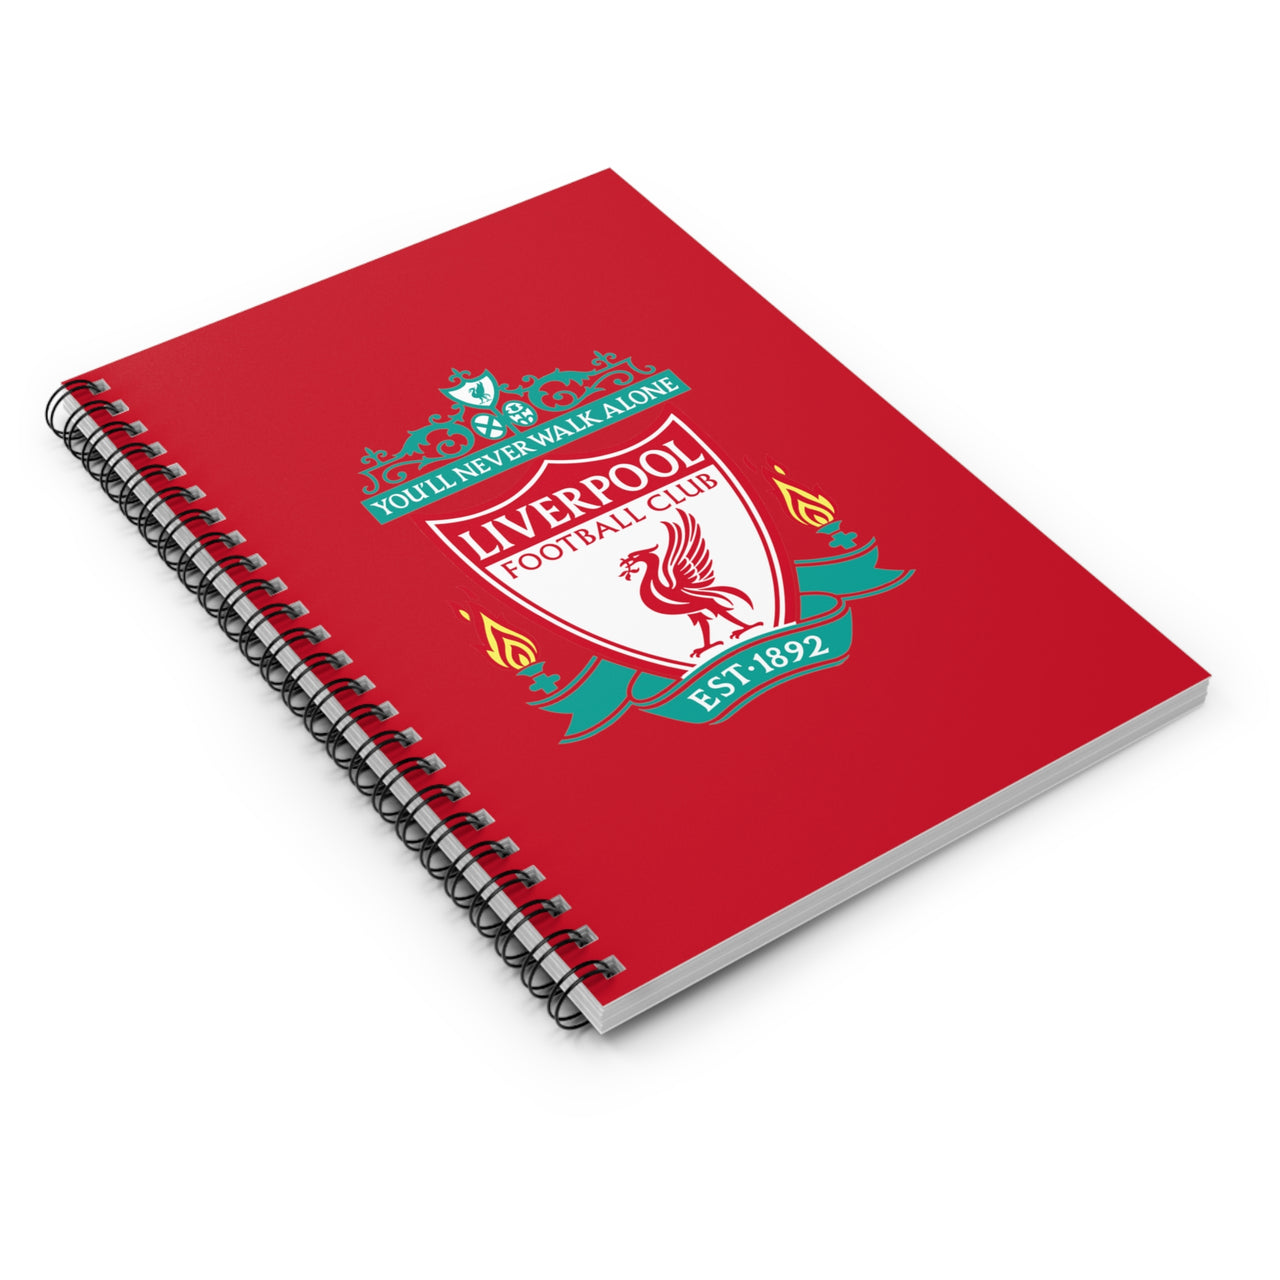 Liverpool Spiral Notebook - Ruled Line